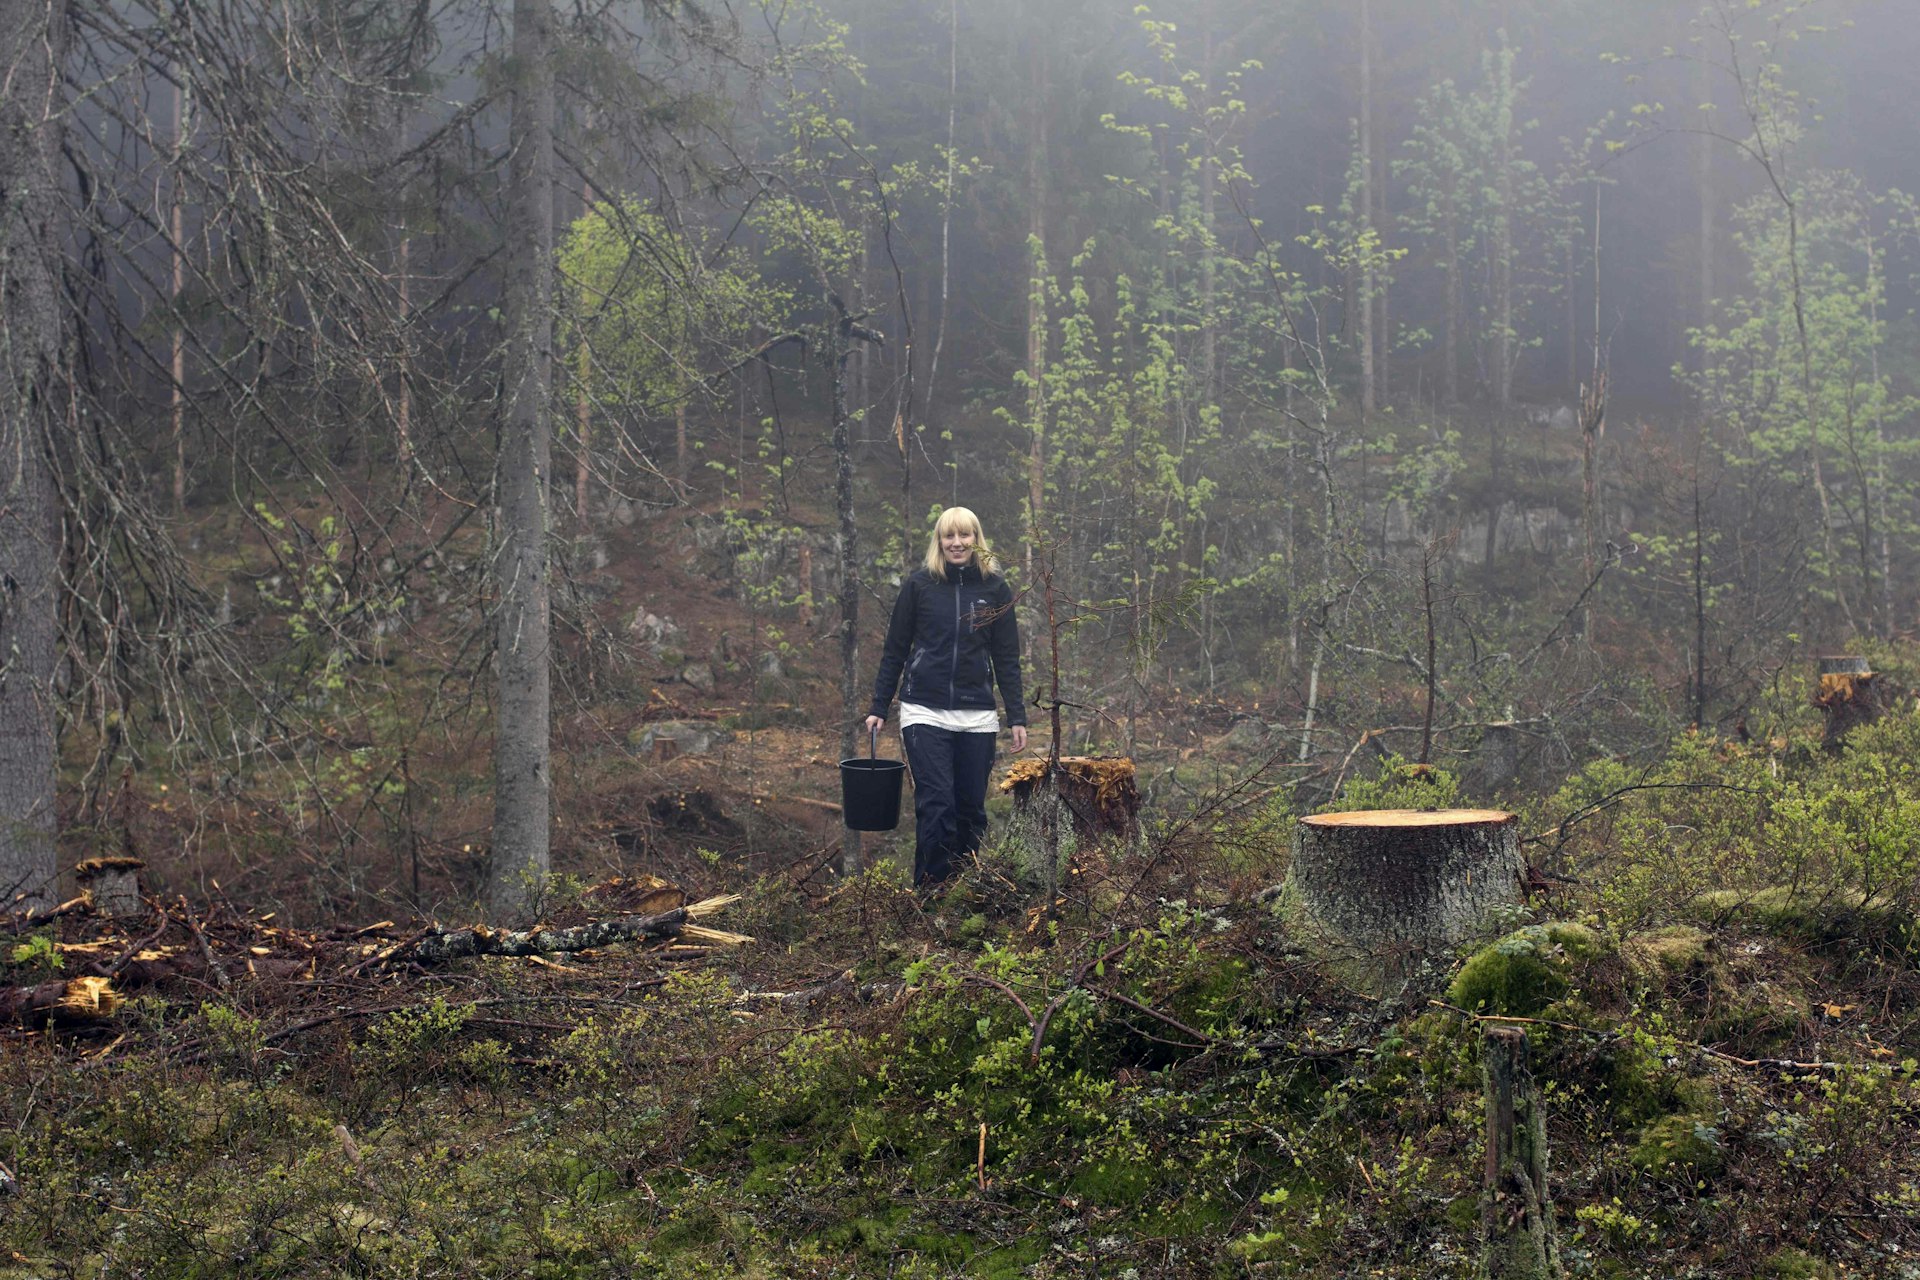 The trees in this Norwegian forest will one day become the greatest books of our time